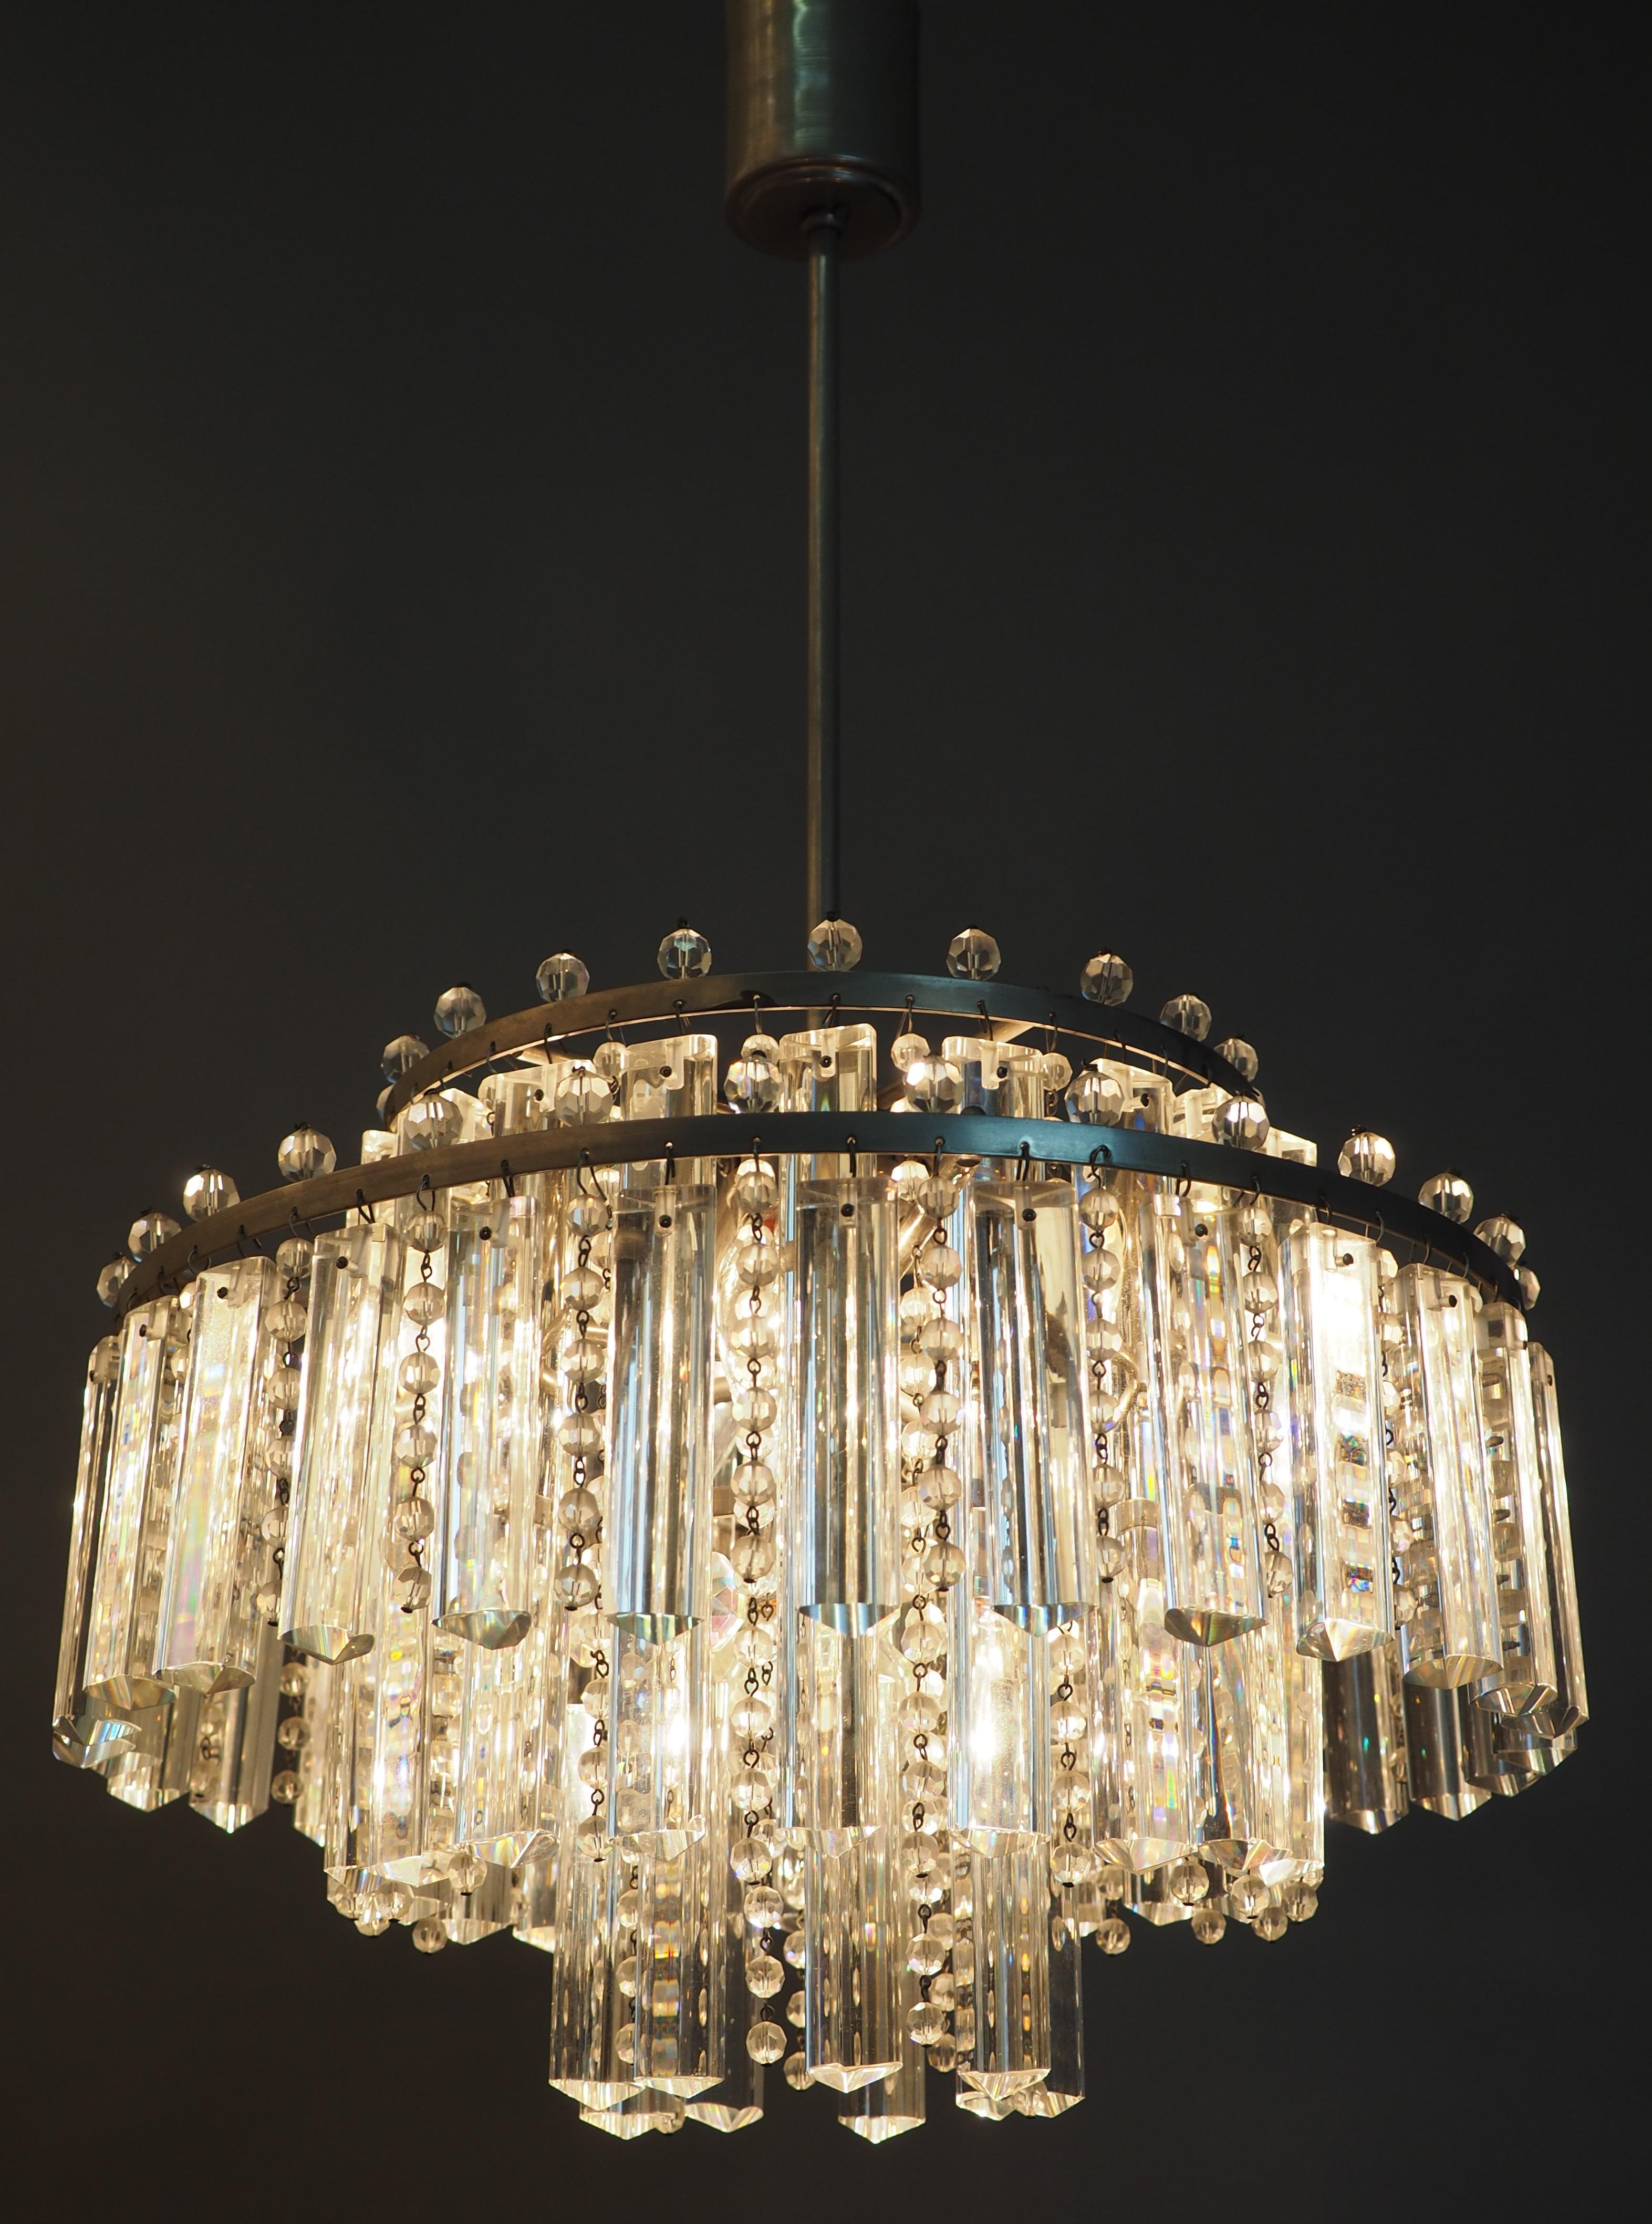 Pair of Rare Heavy Cut Glass and Strass Chandeliers by Palwa, circa 1960s For Sale 1